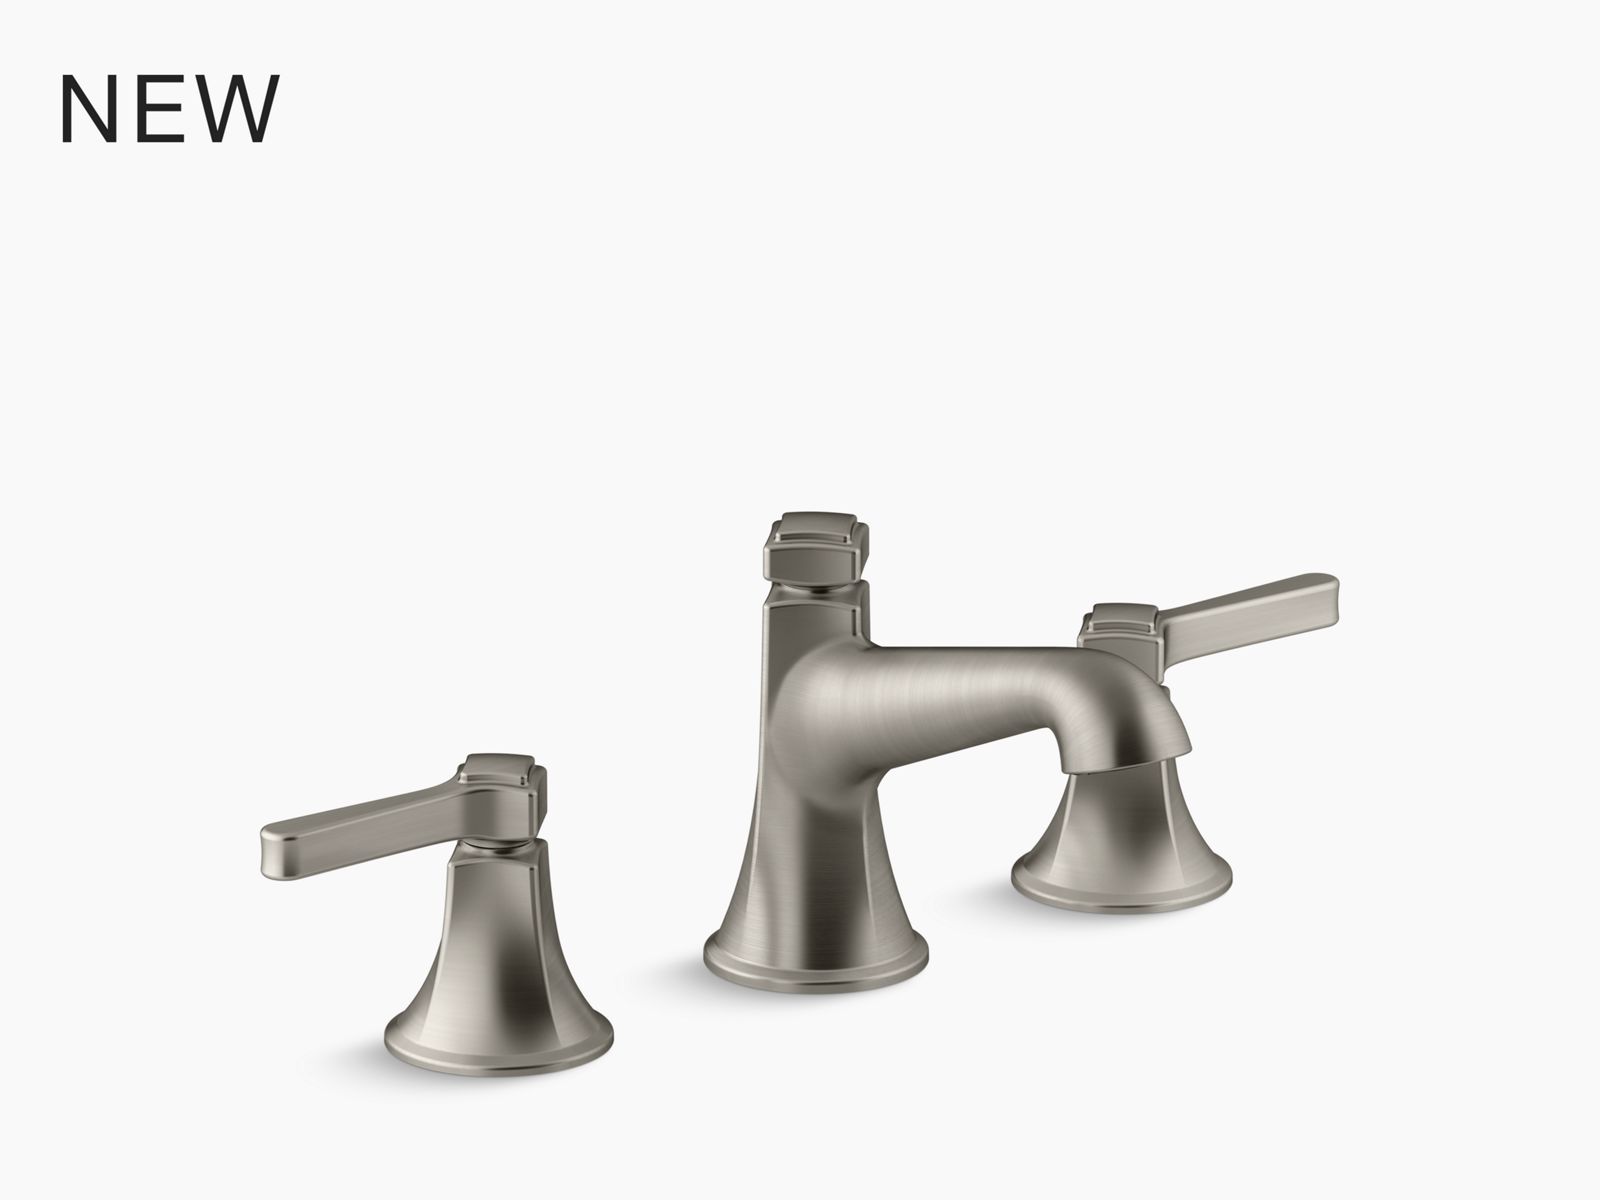 Revival Kitchen Sink Faucet With Traditional Handles K 16109 4A